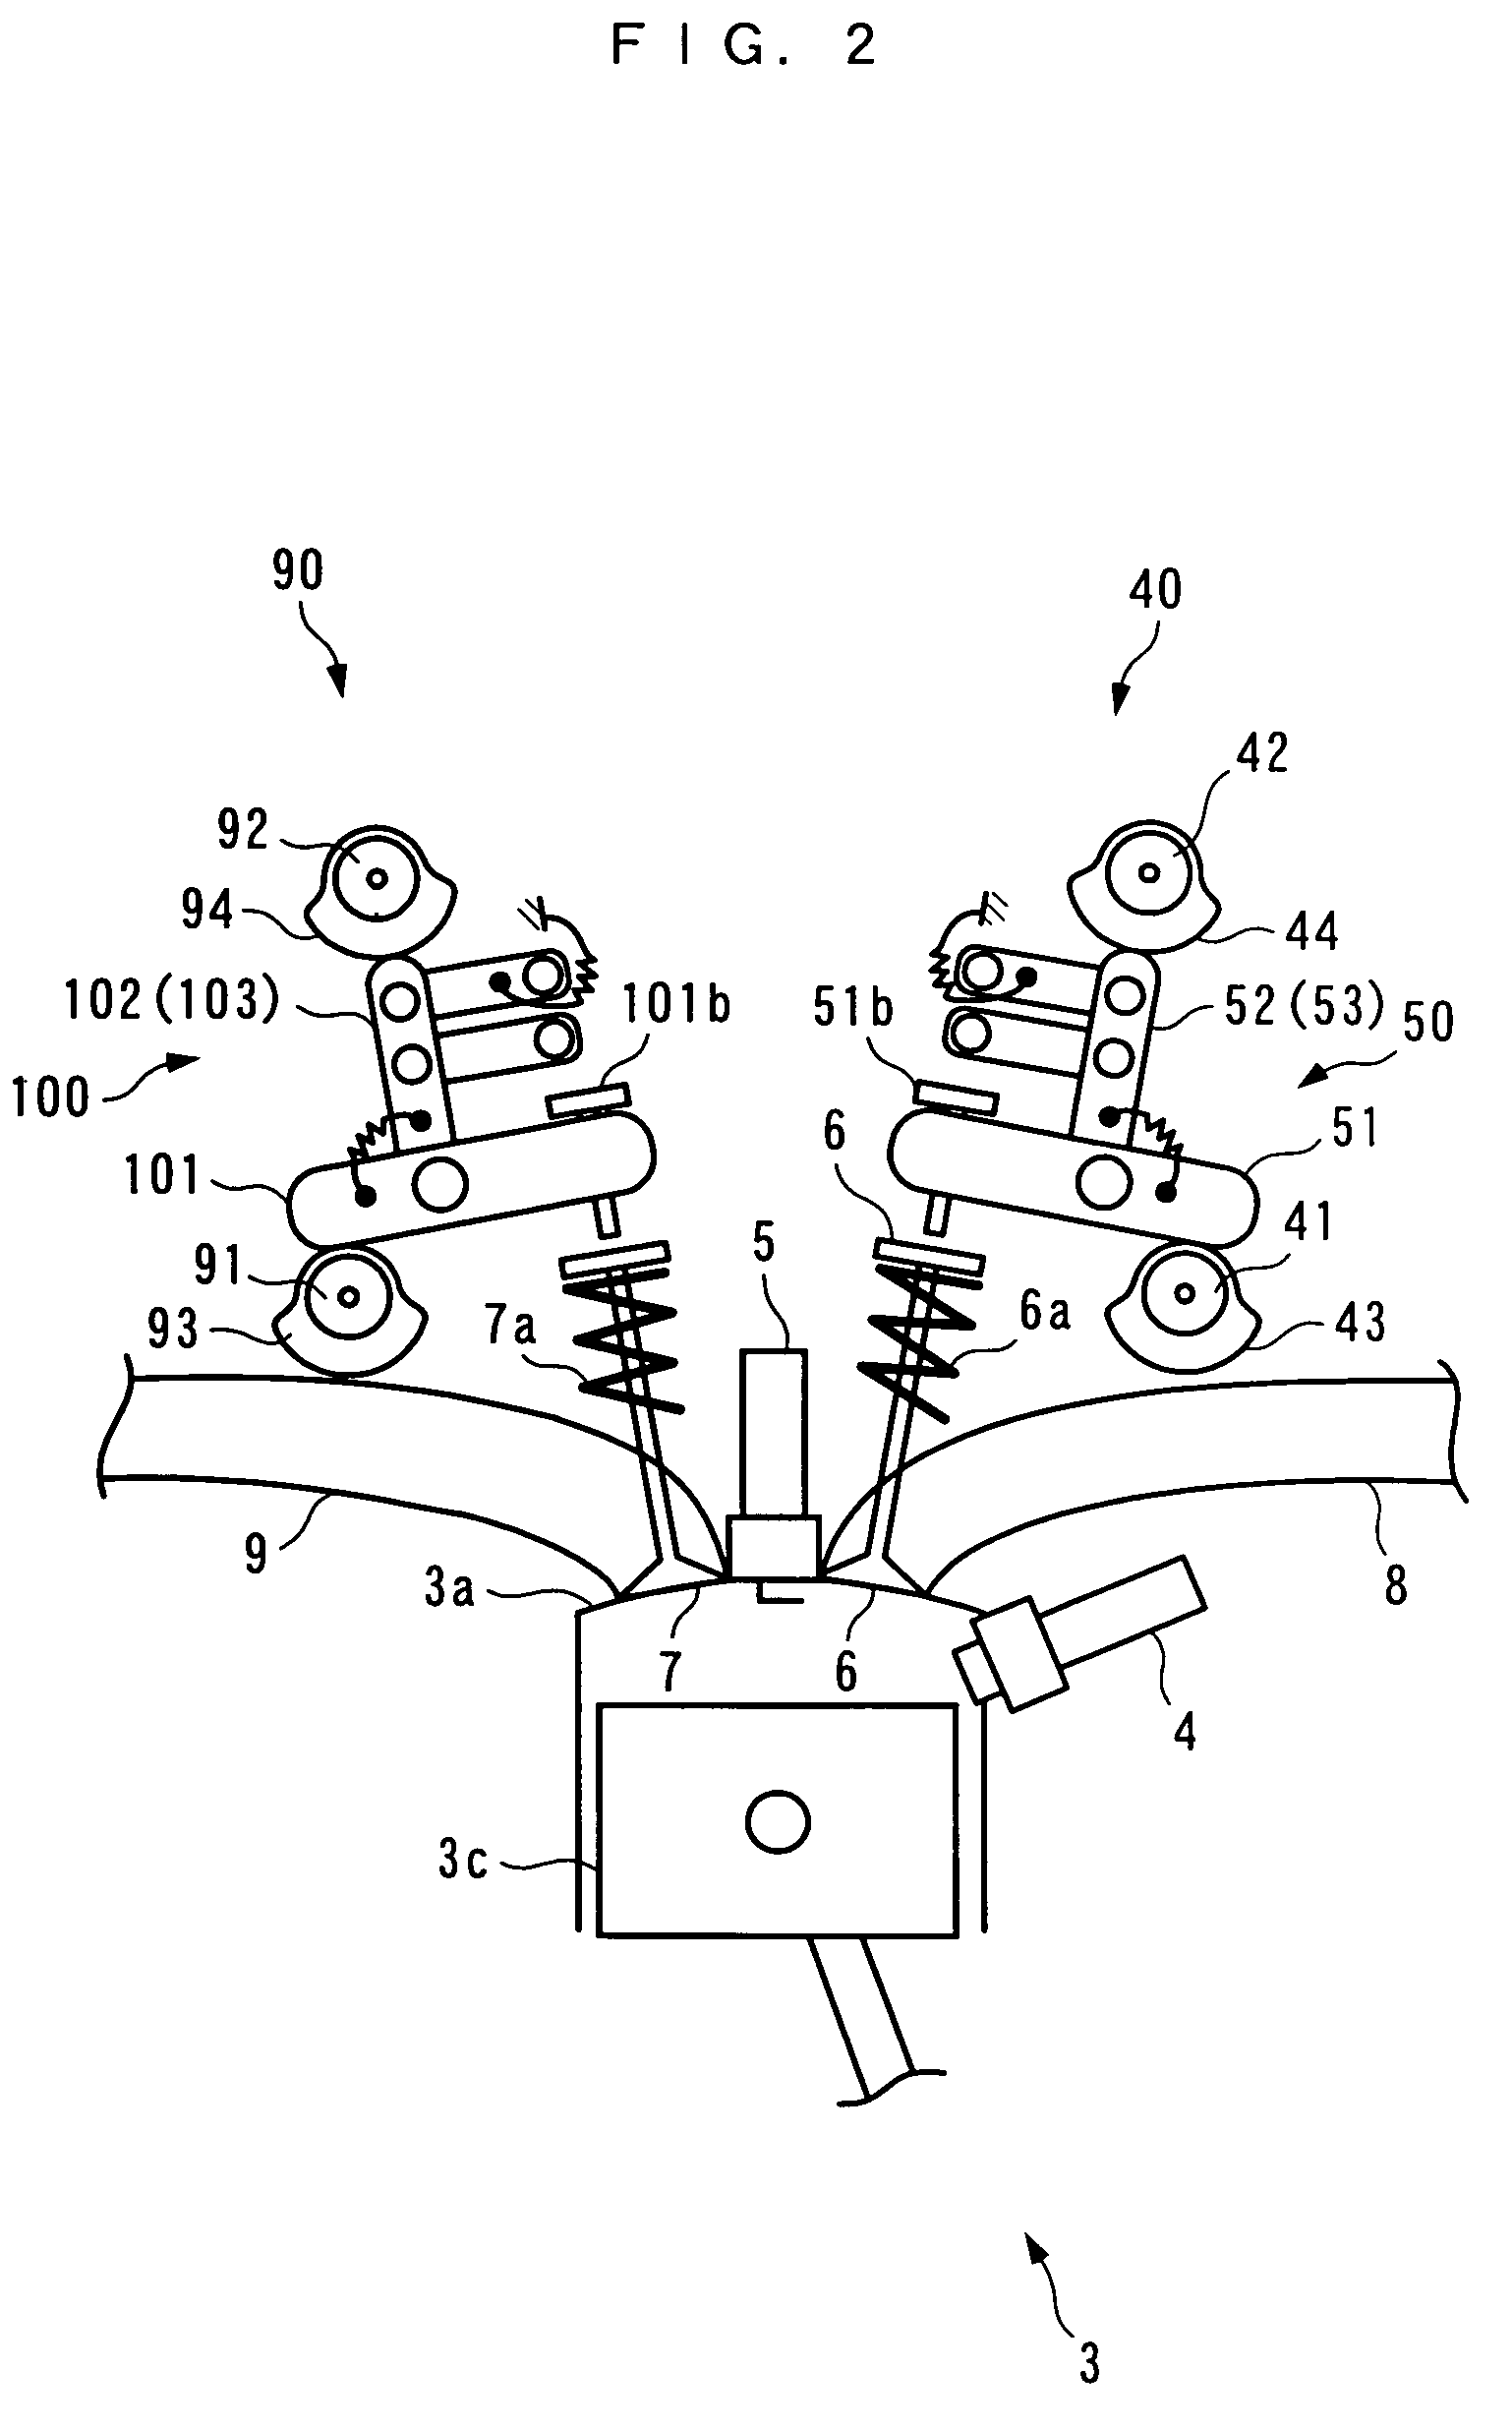 Intake air amount control system for internal combustion engine and control system